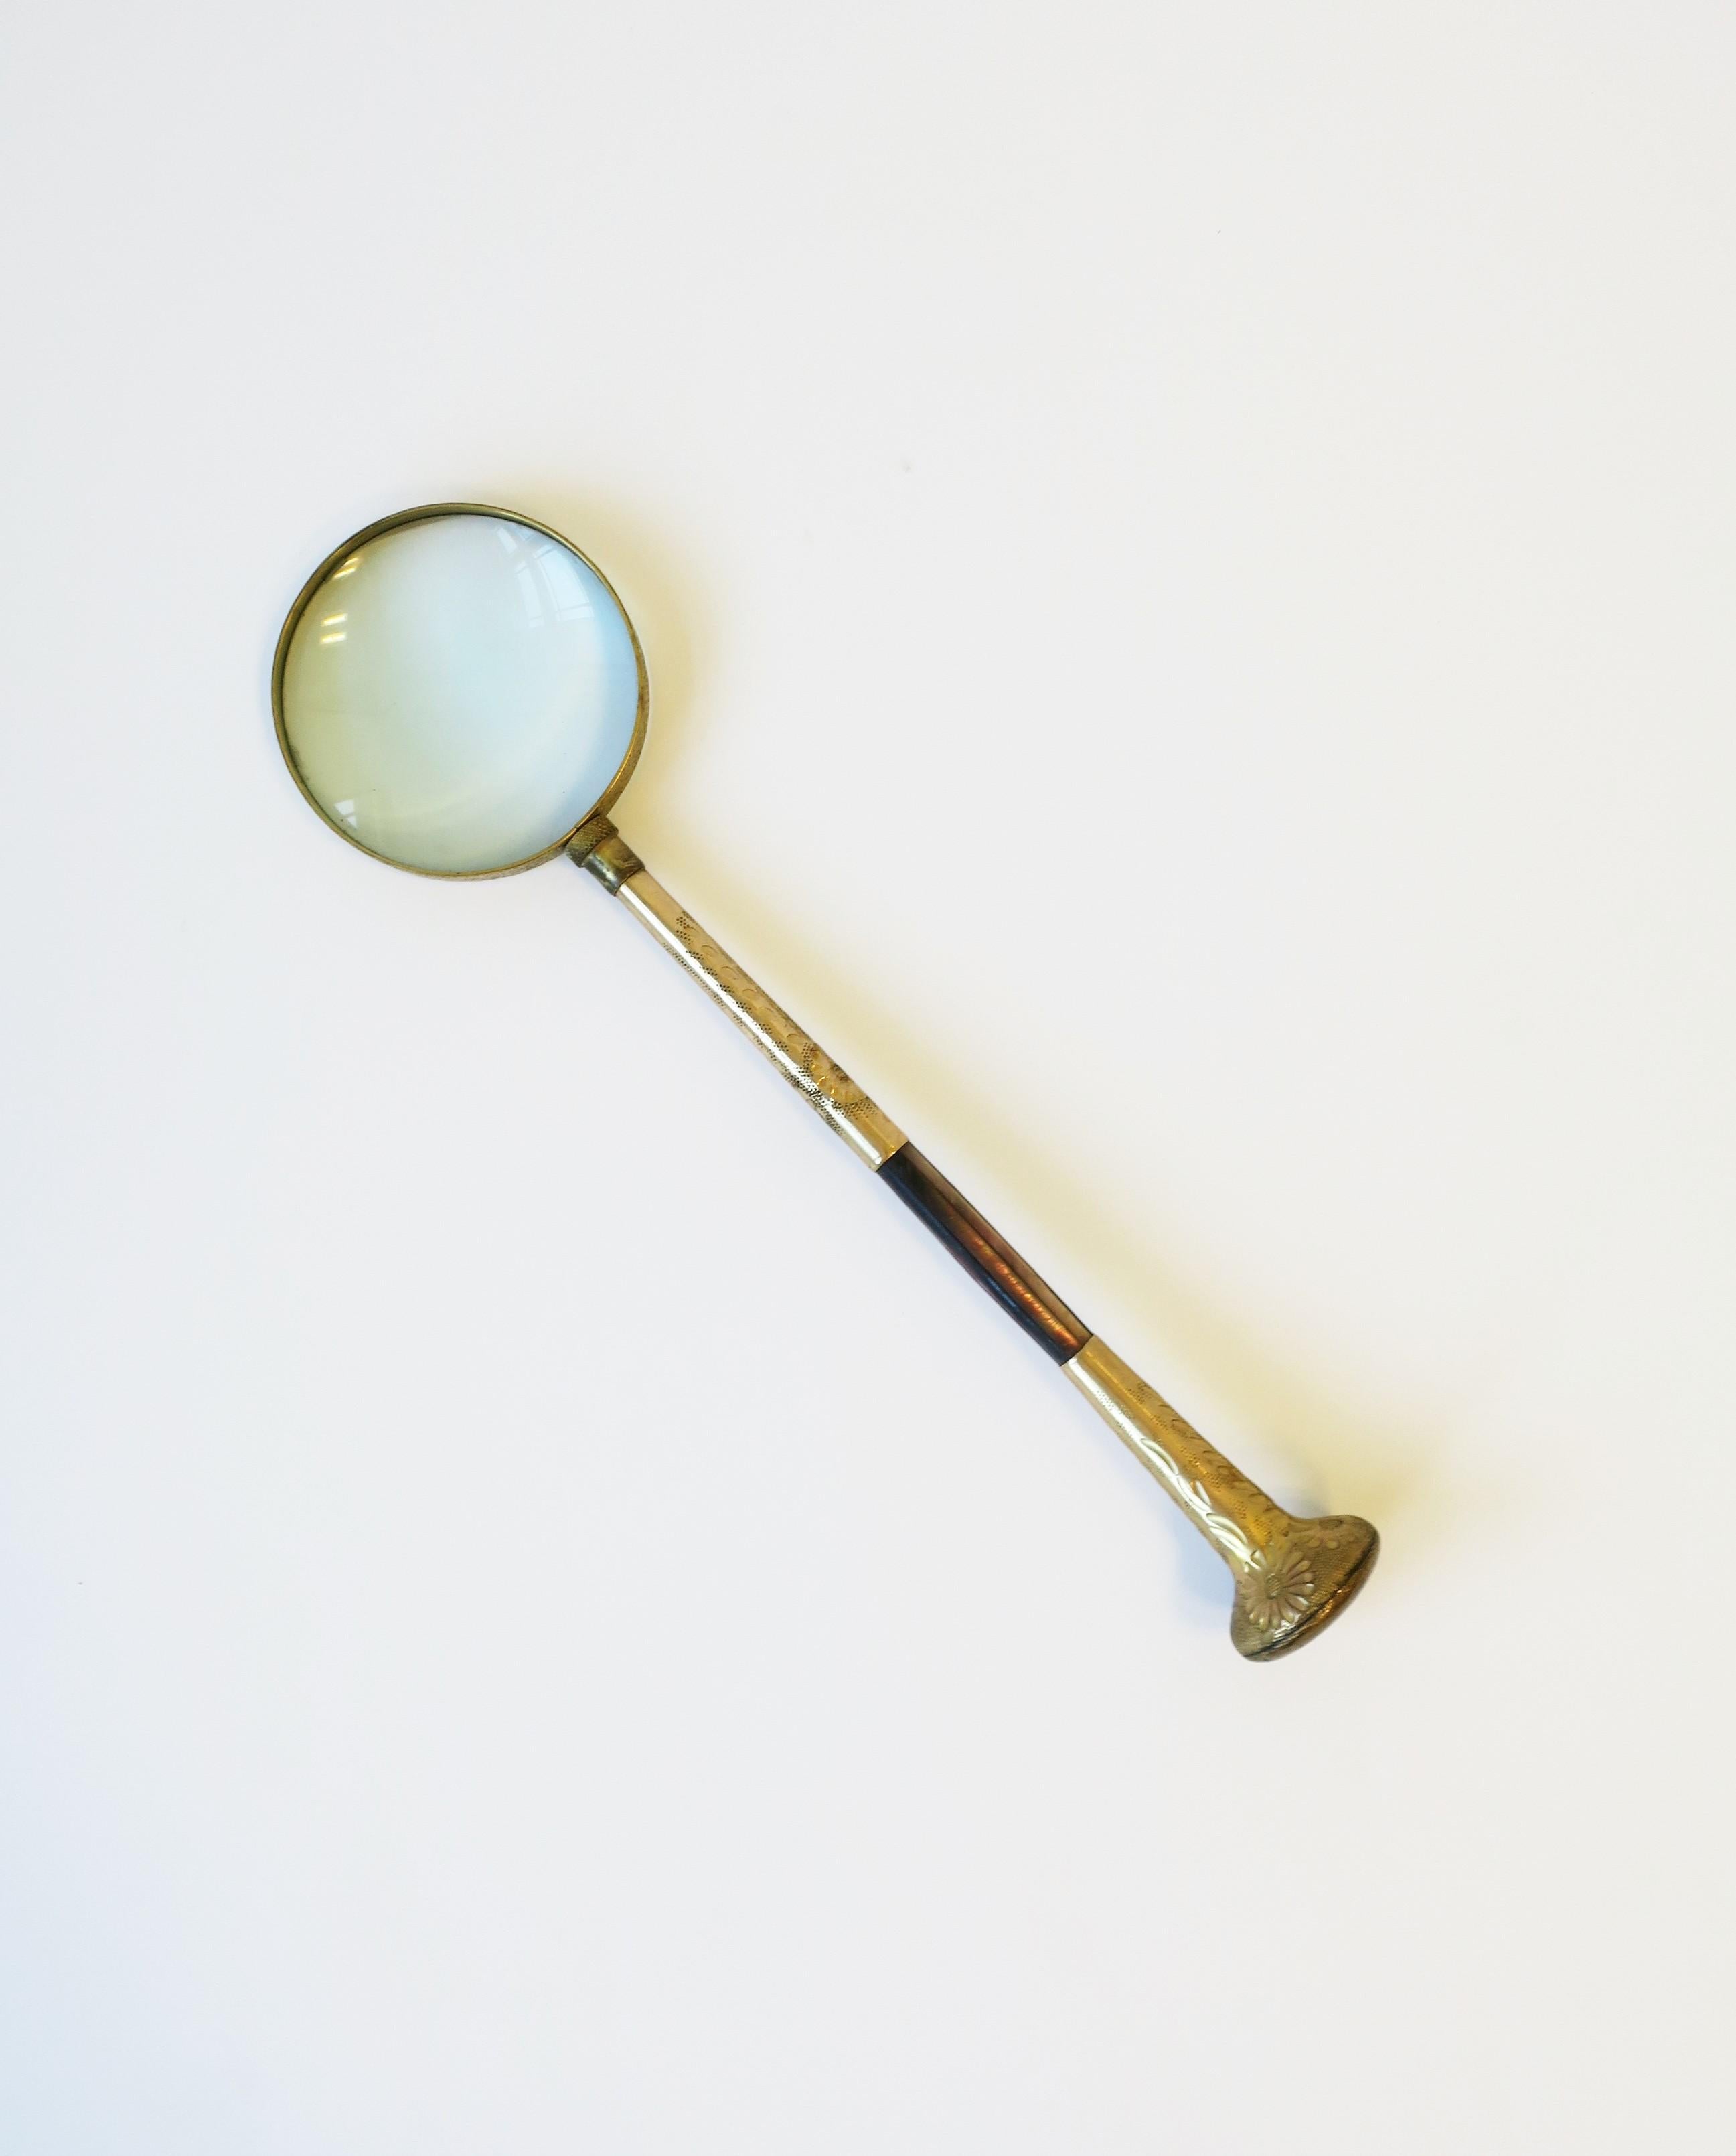 A beautiful and relatively large brass and abalone seashell magnifying glass, circa 20th-century. Handle has abalone seashell inlay and a floral embossed design. A great desk or library accessory. Dimensions: 2.38